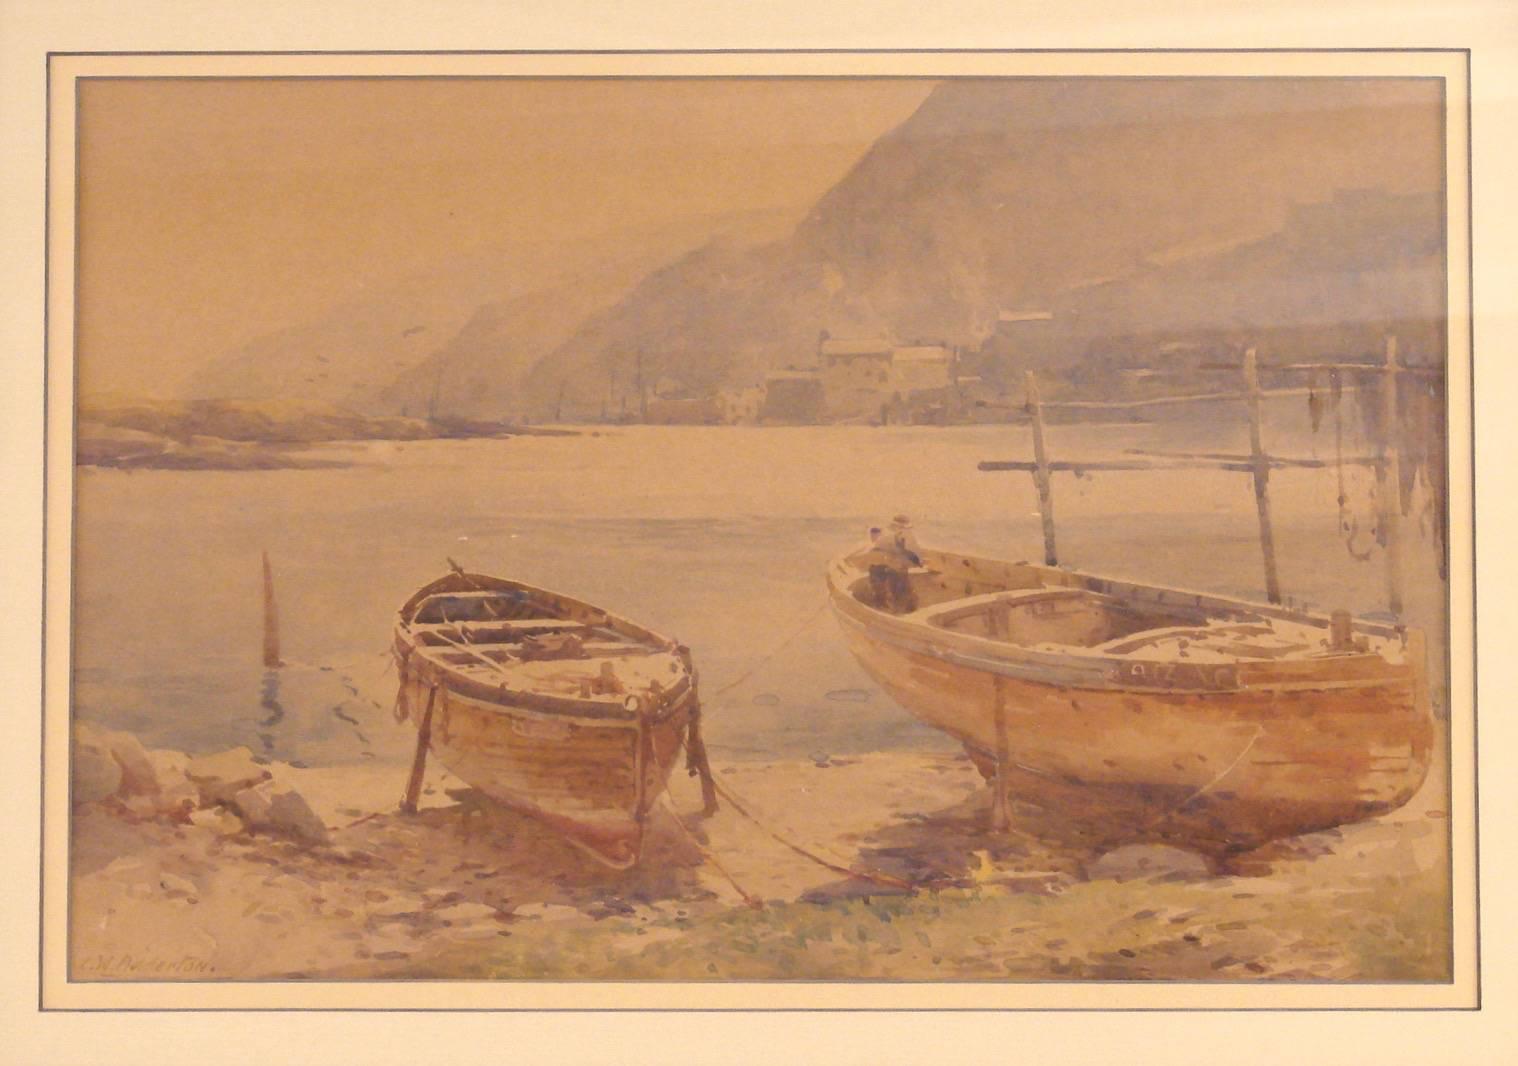 A very pleasing watercolor on paper by a well-listed British artist, Charles William Adderton, painted in a mellow brown palette, depicting small craft on shore in a mountain and lake setting. Framed and glazed. Circa 1900-1925.